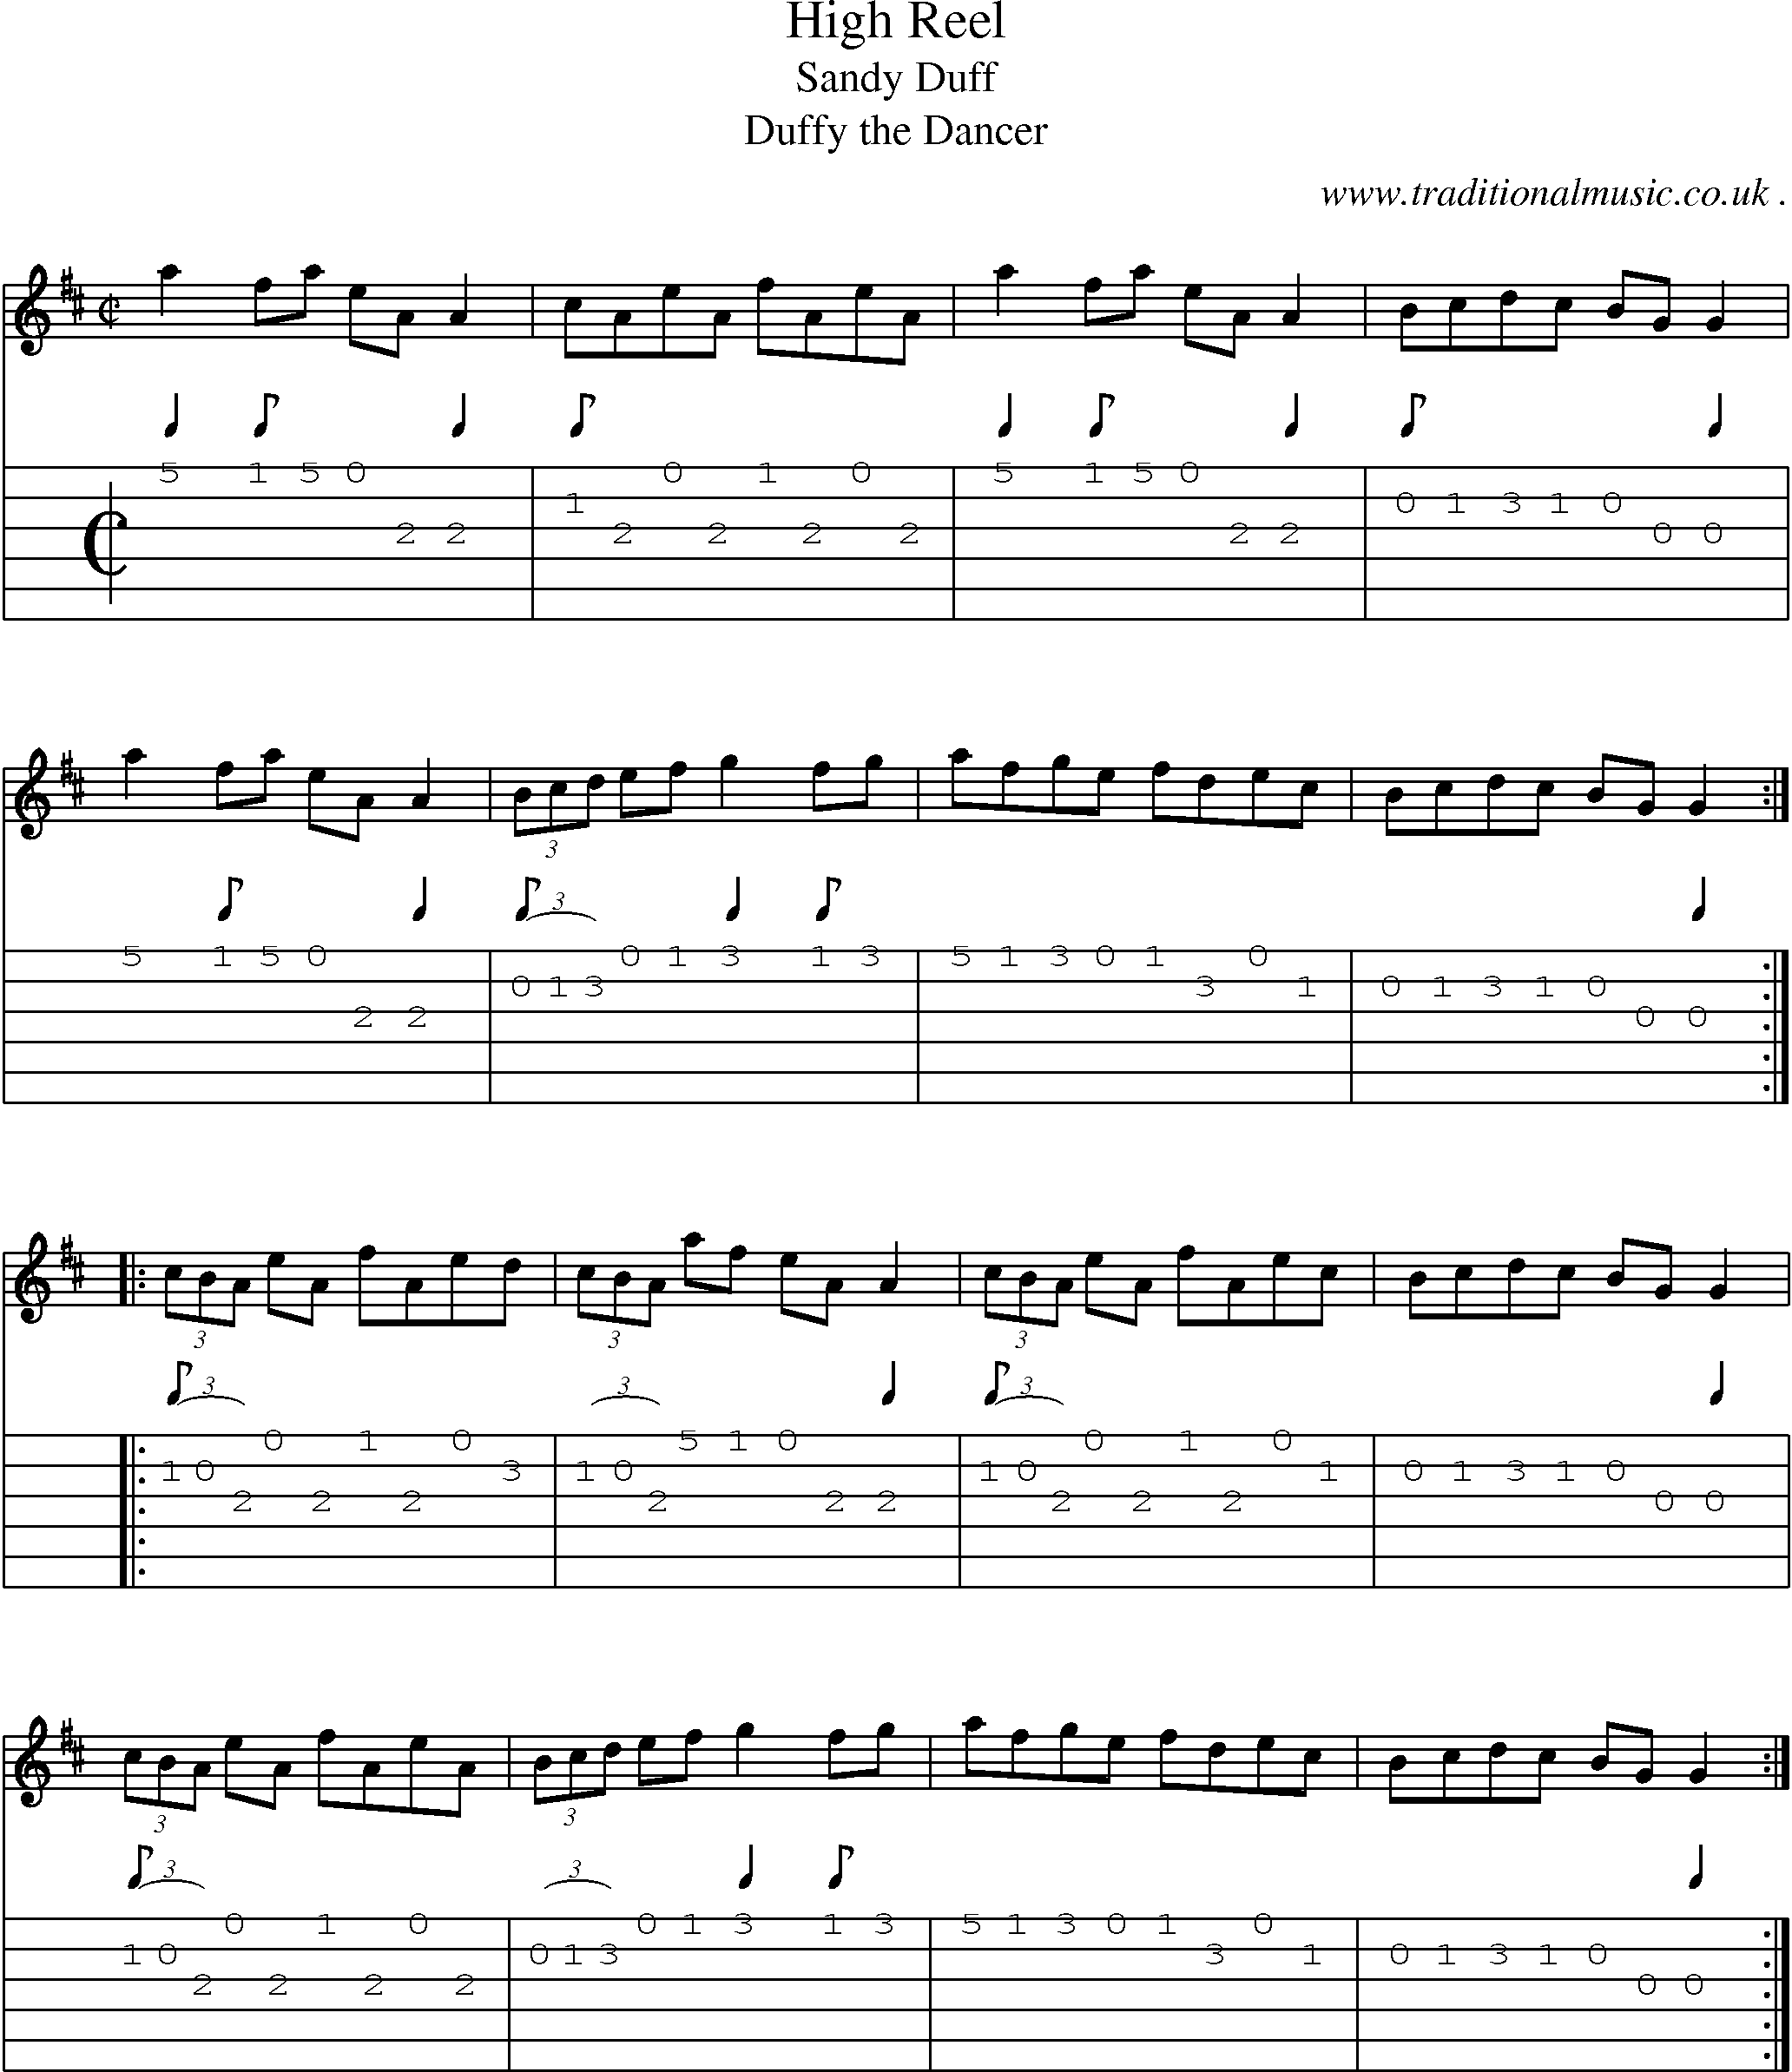 Sheet-Music and Guitar Tabs for High Reel